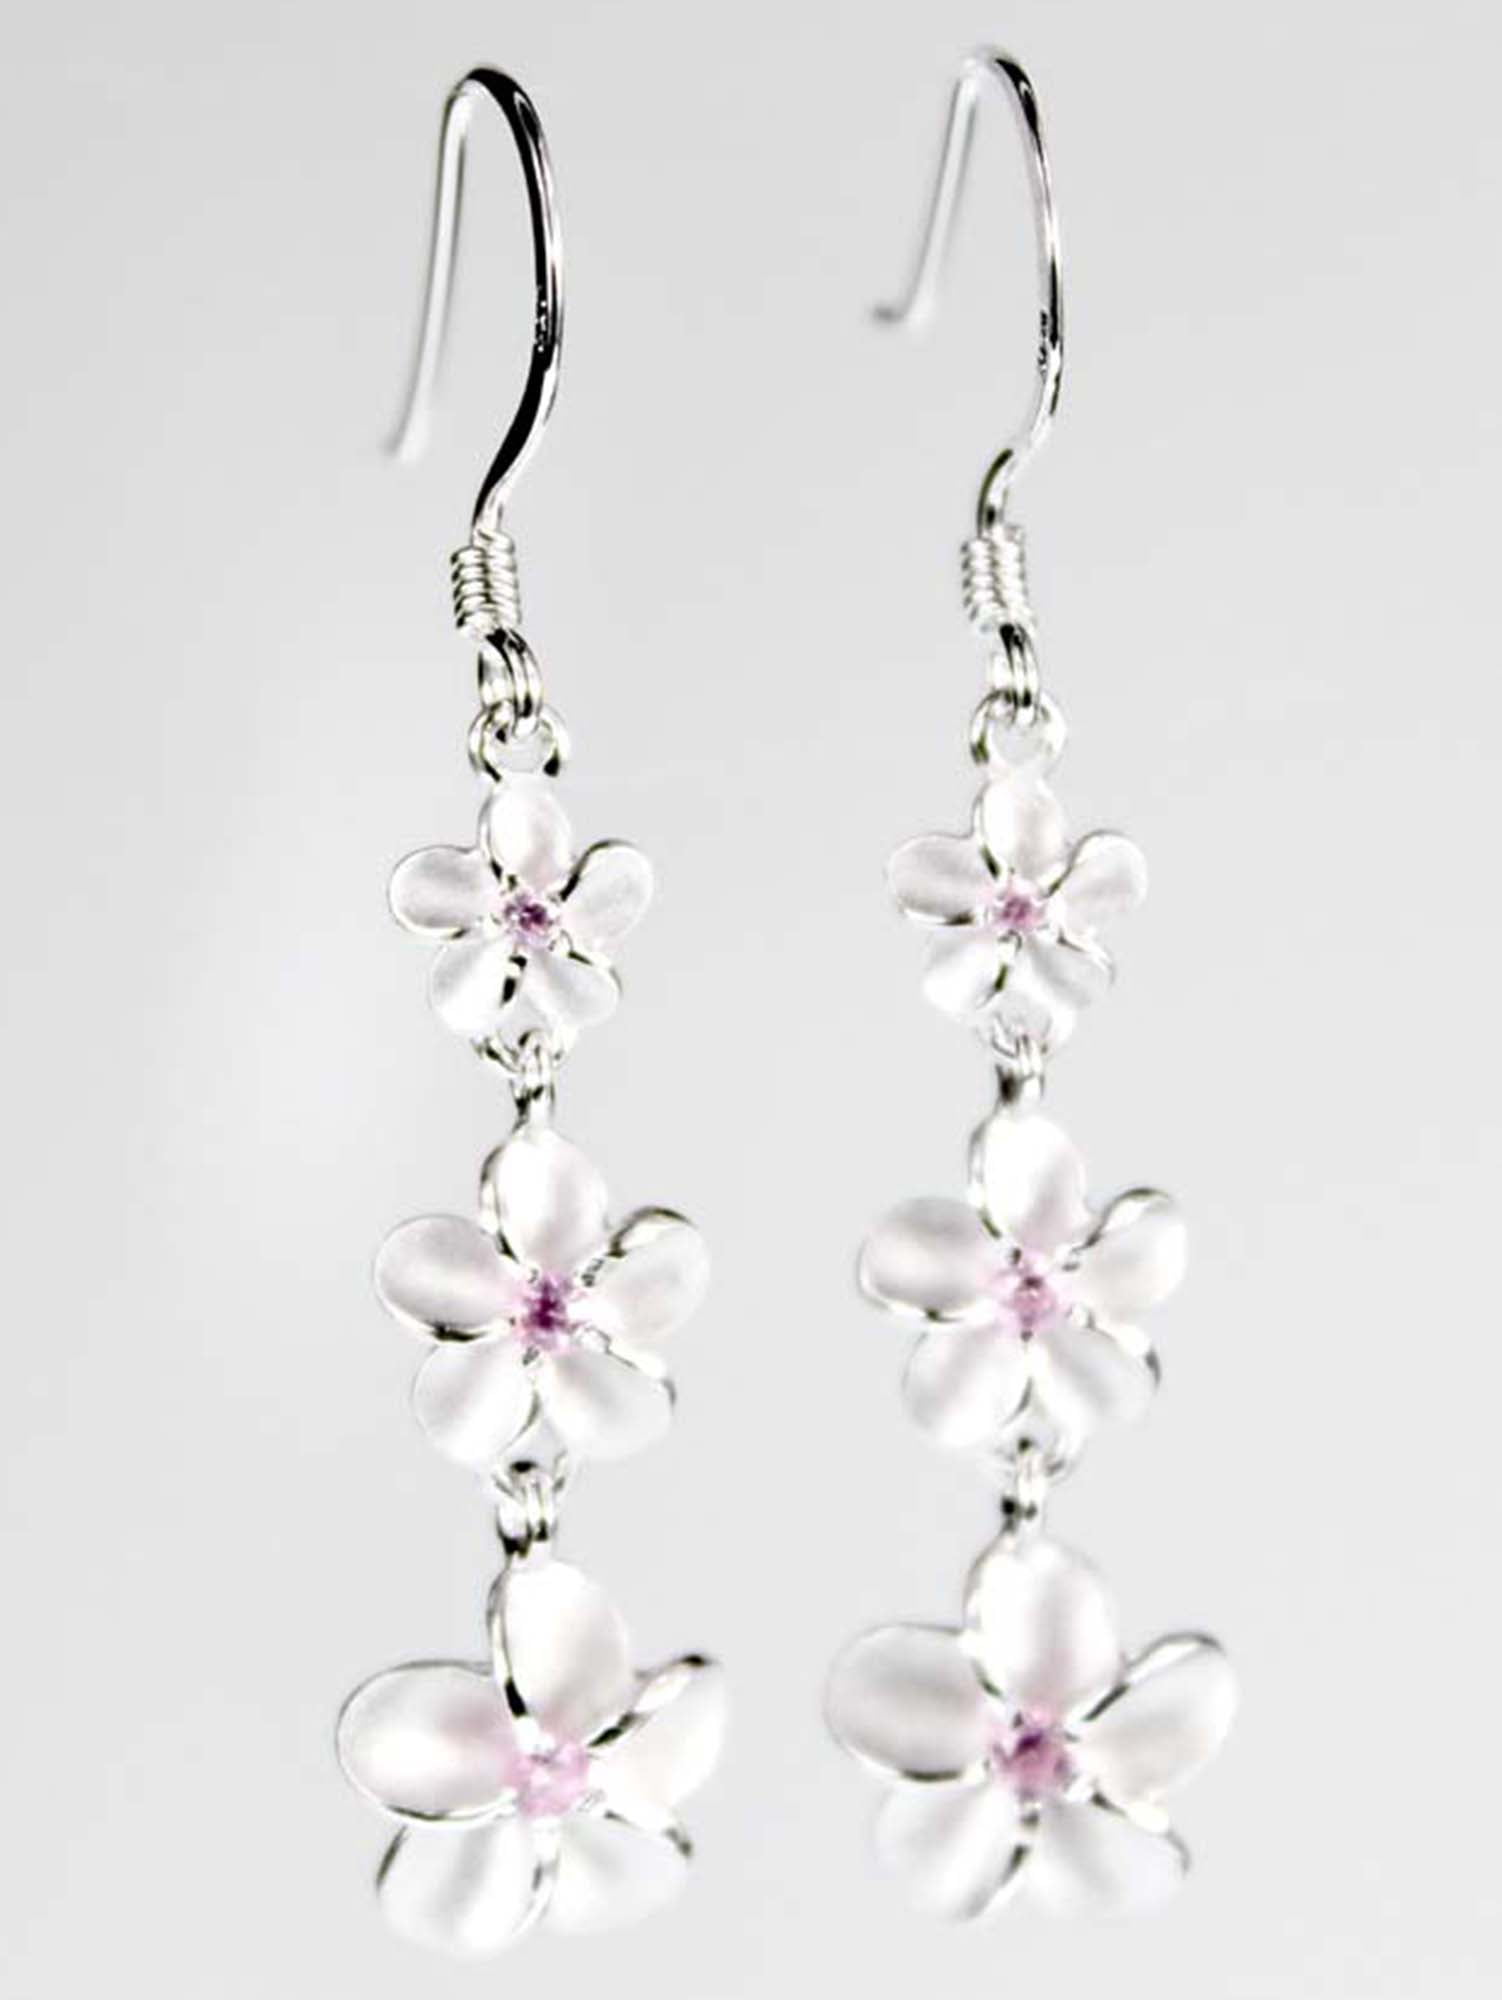 A PAIR OF DANGLY BLACK/PINK BEAD EARRINGS WITH 925 SOLID SILVER HOOKS NEW..